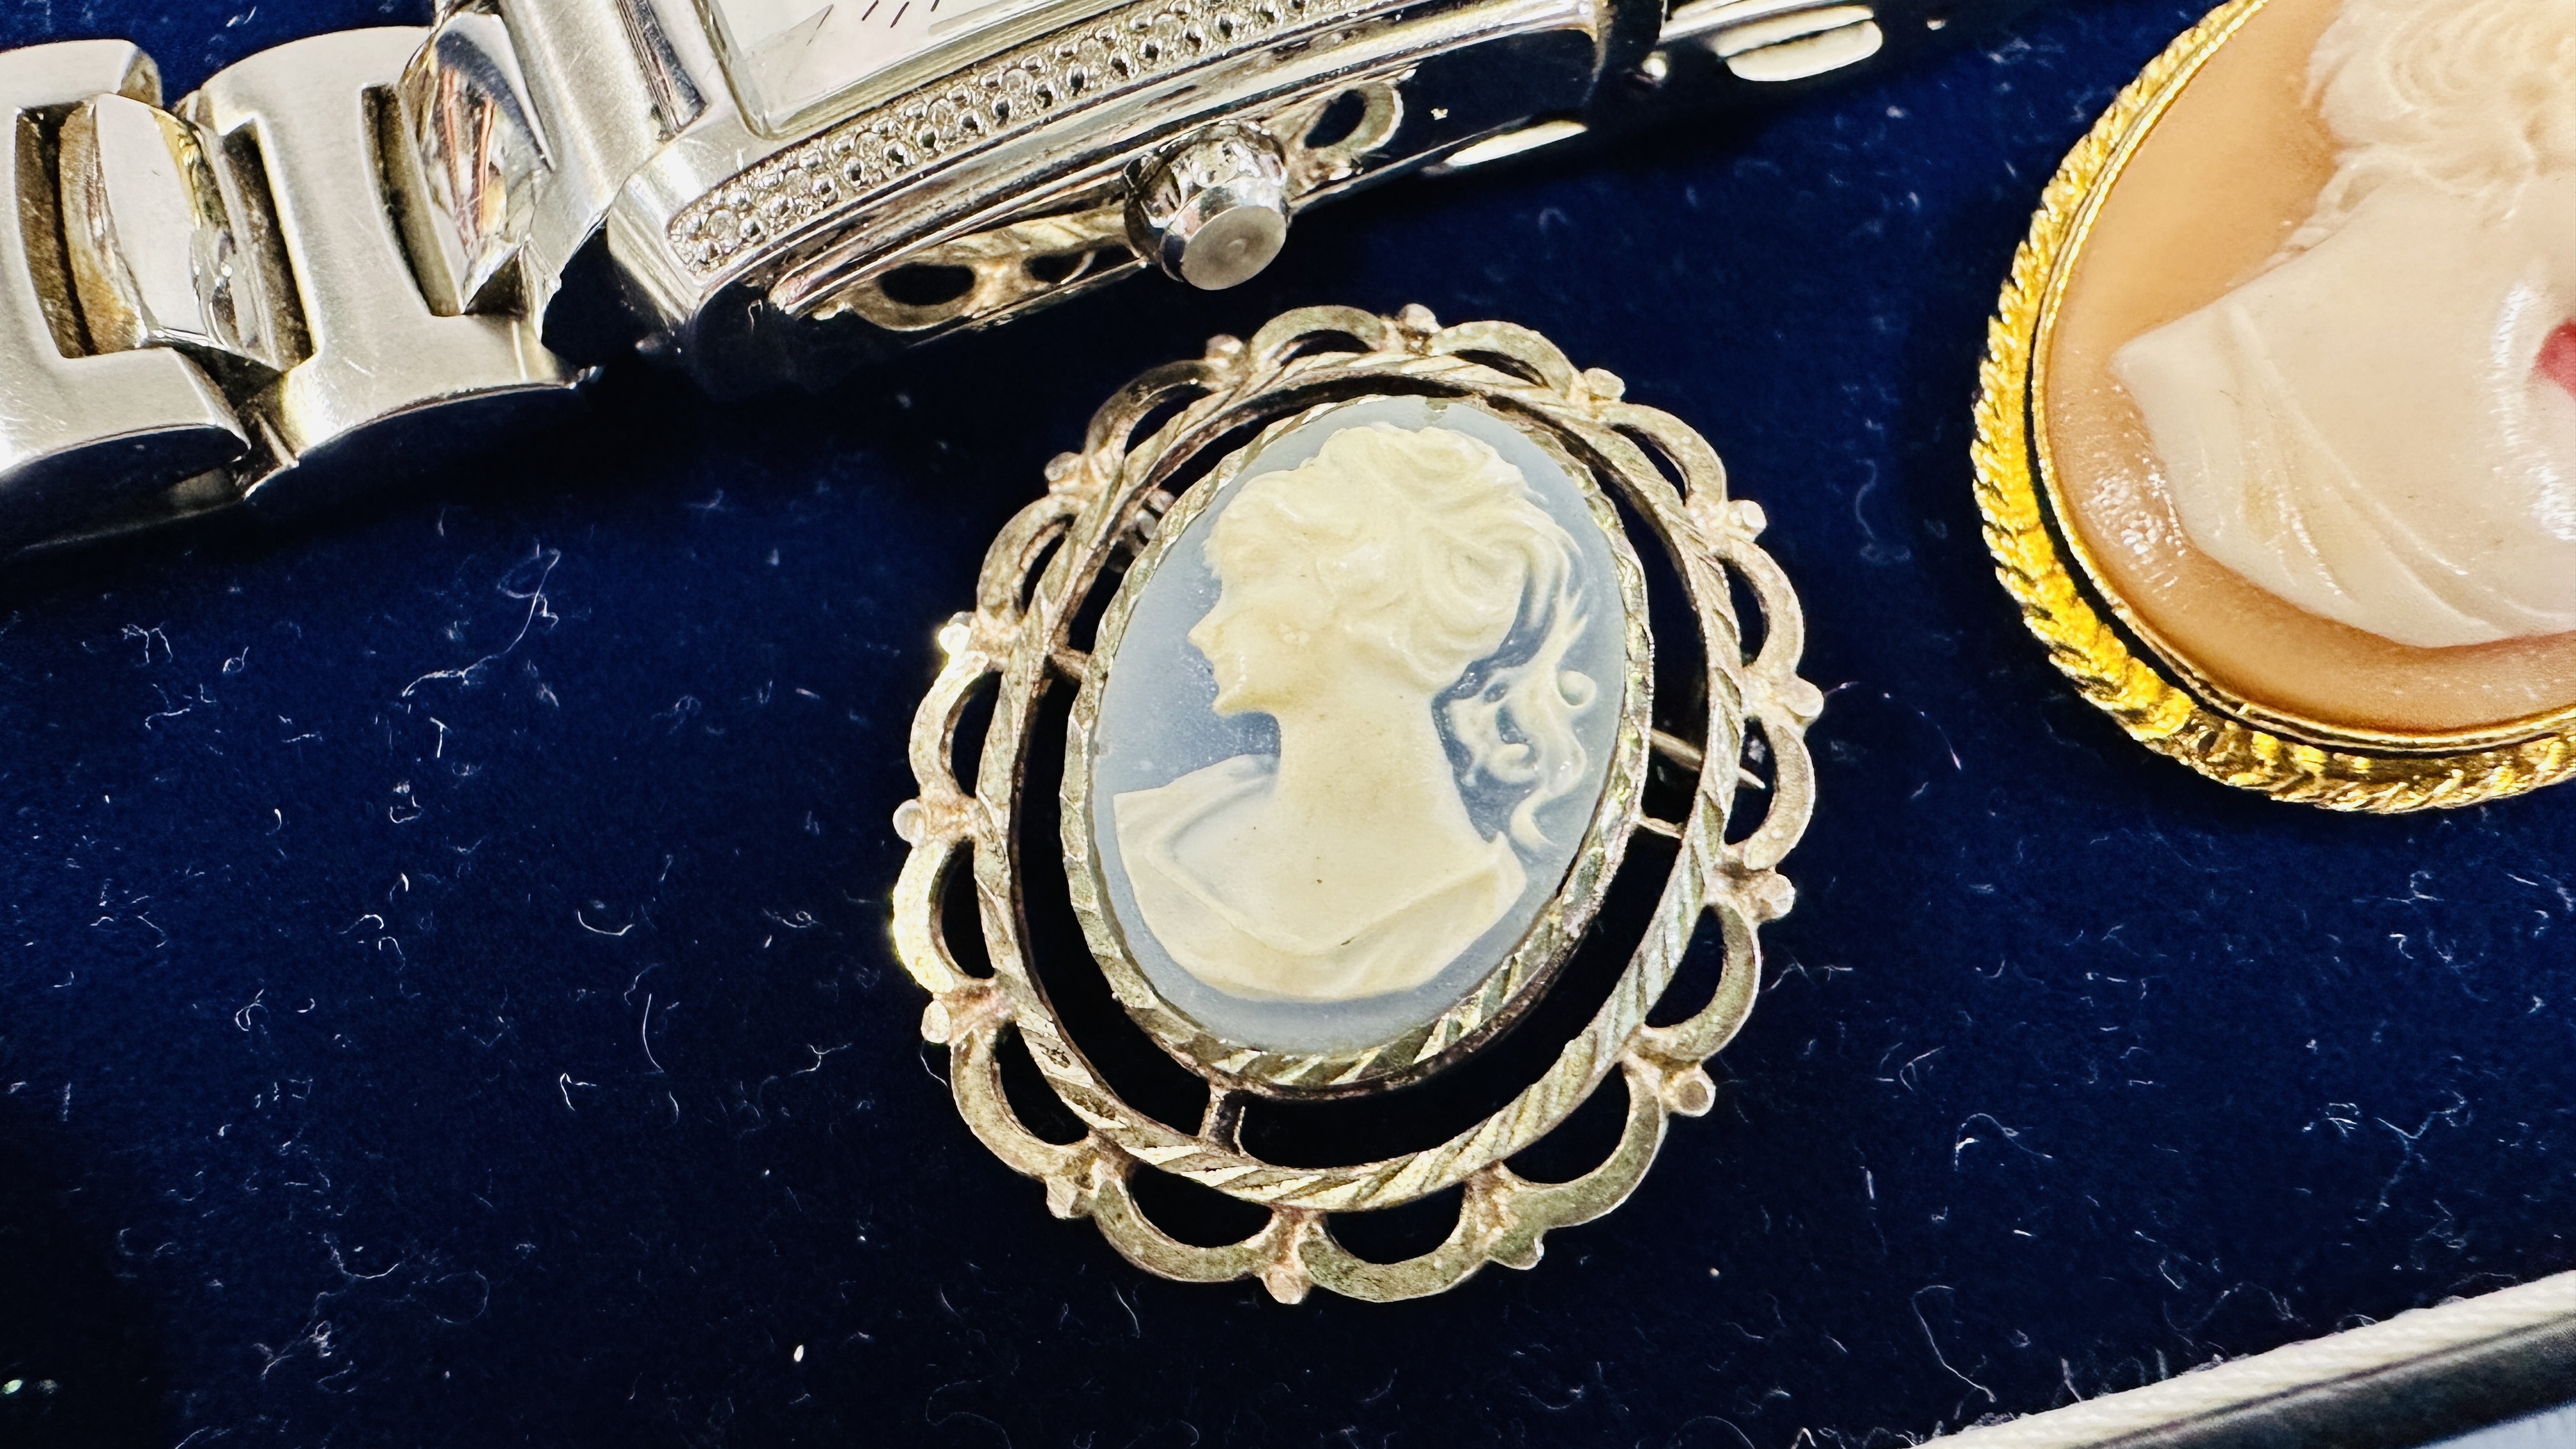 TWO DESIGNER WRIST WATCHES TO INCLUDE AN EXAMPLE MARKED AMADEUS AND 3 CAMEO BROOCHES. - Image 6 of 7